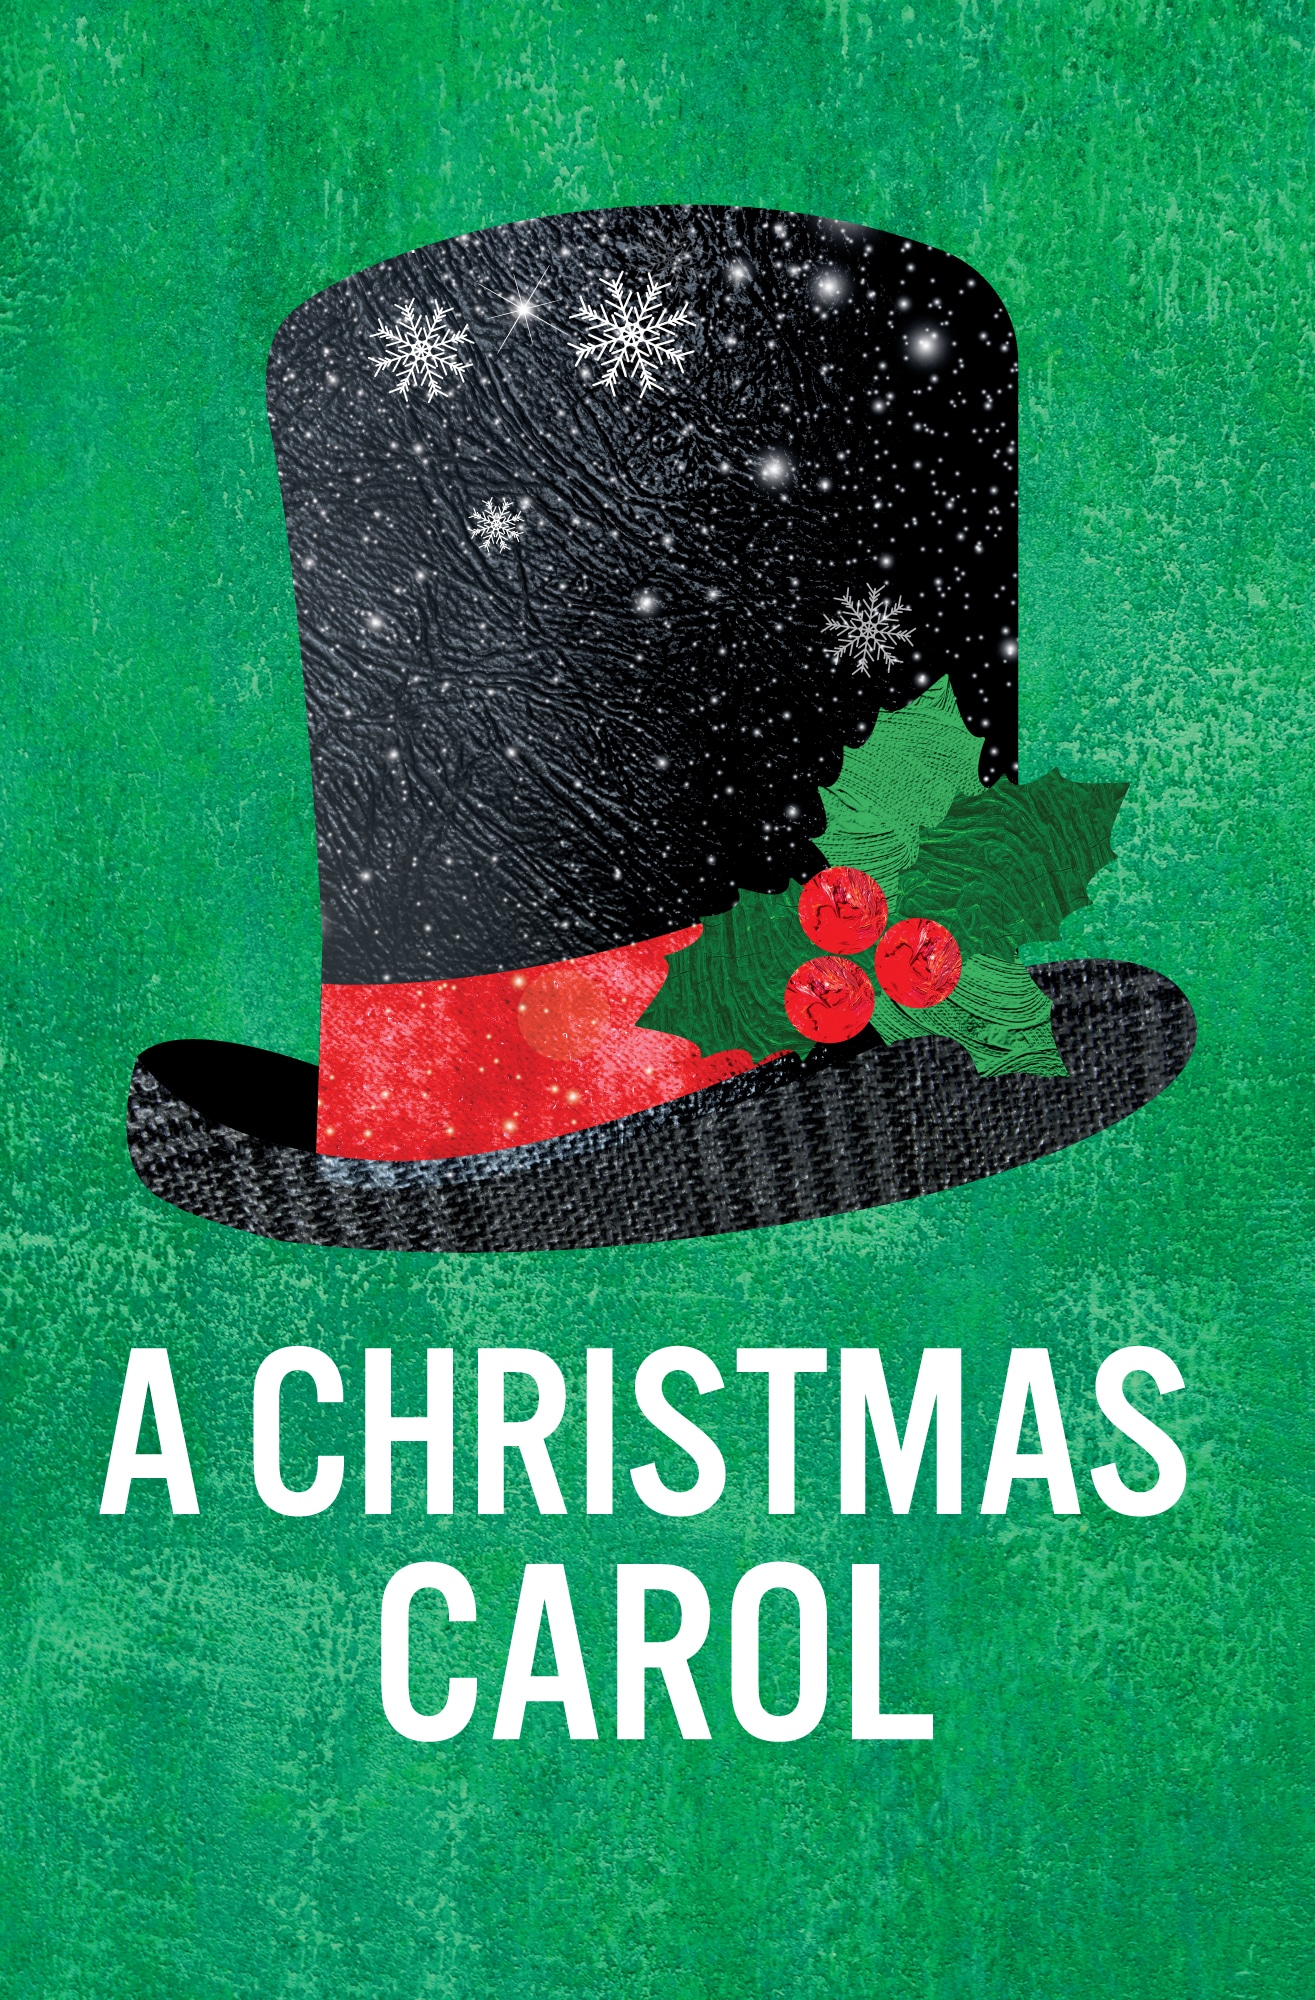 A Christmas Carol Graphic. Links to SchoolFest Study Guide when available. 